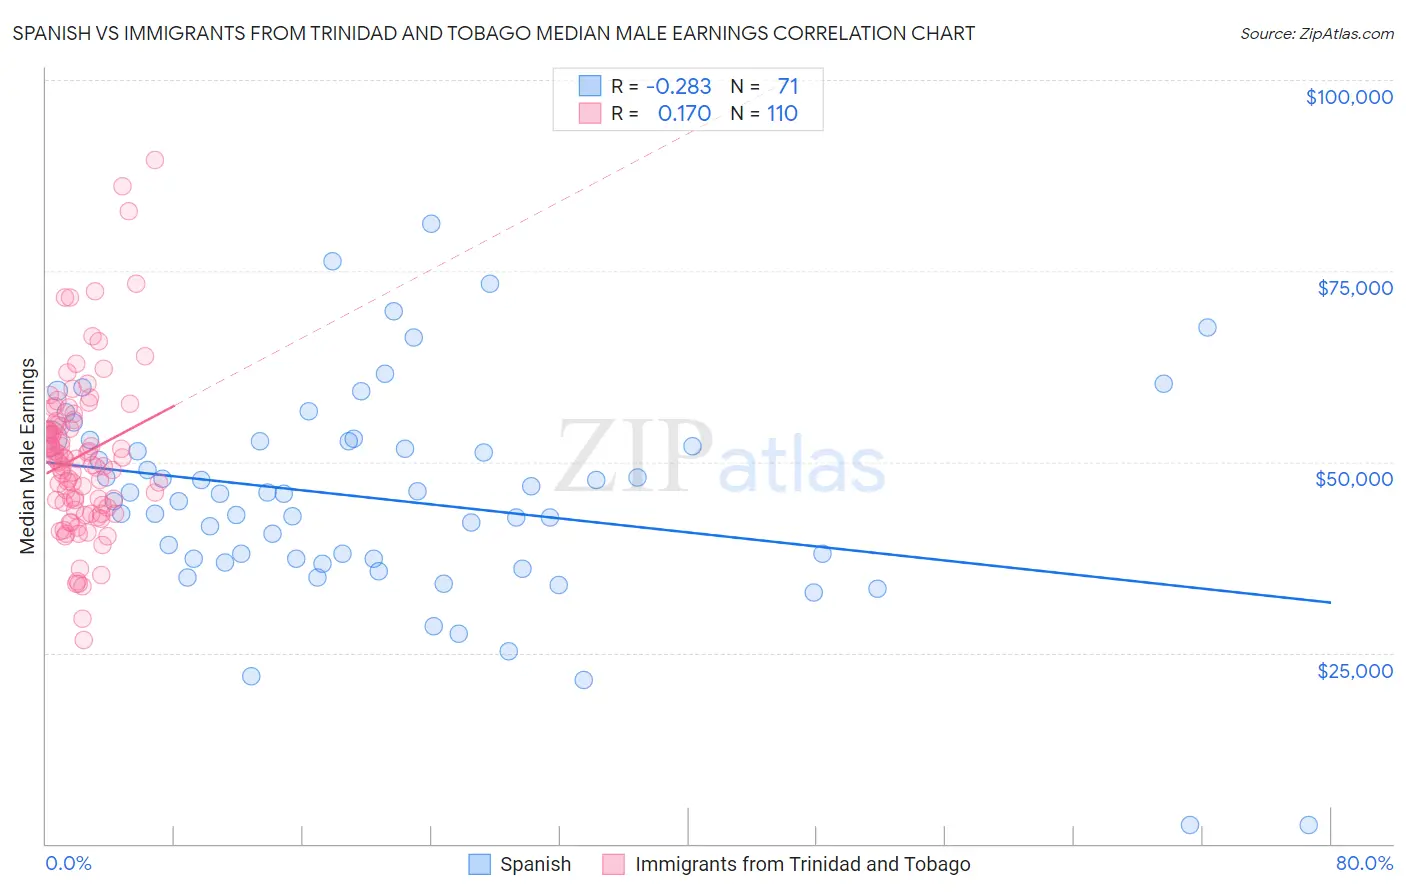 Spanish vs Immigrants from Trinidad and Tobago Median Male Earnings